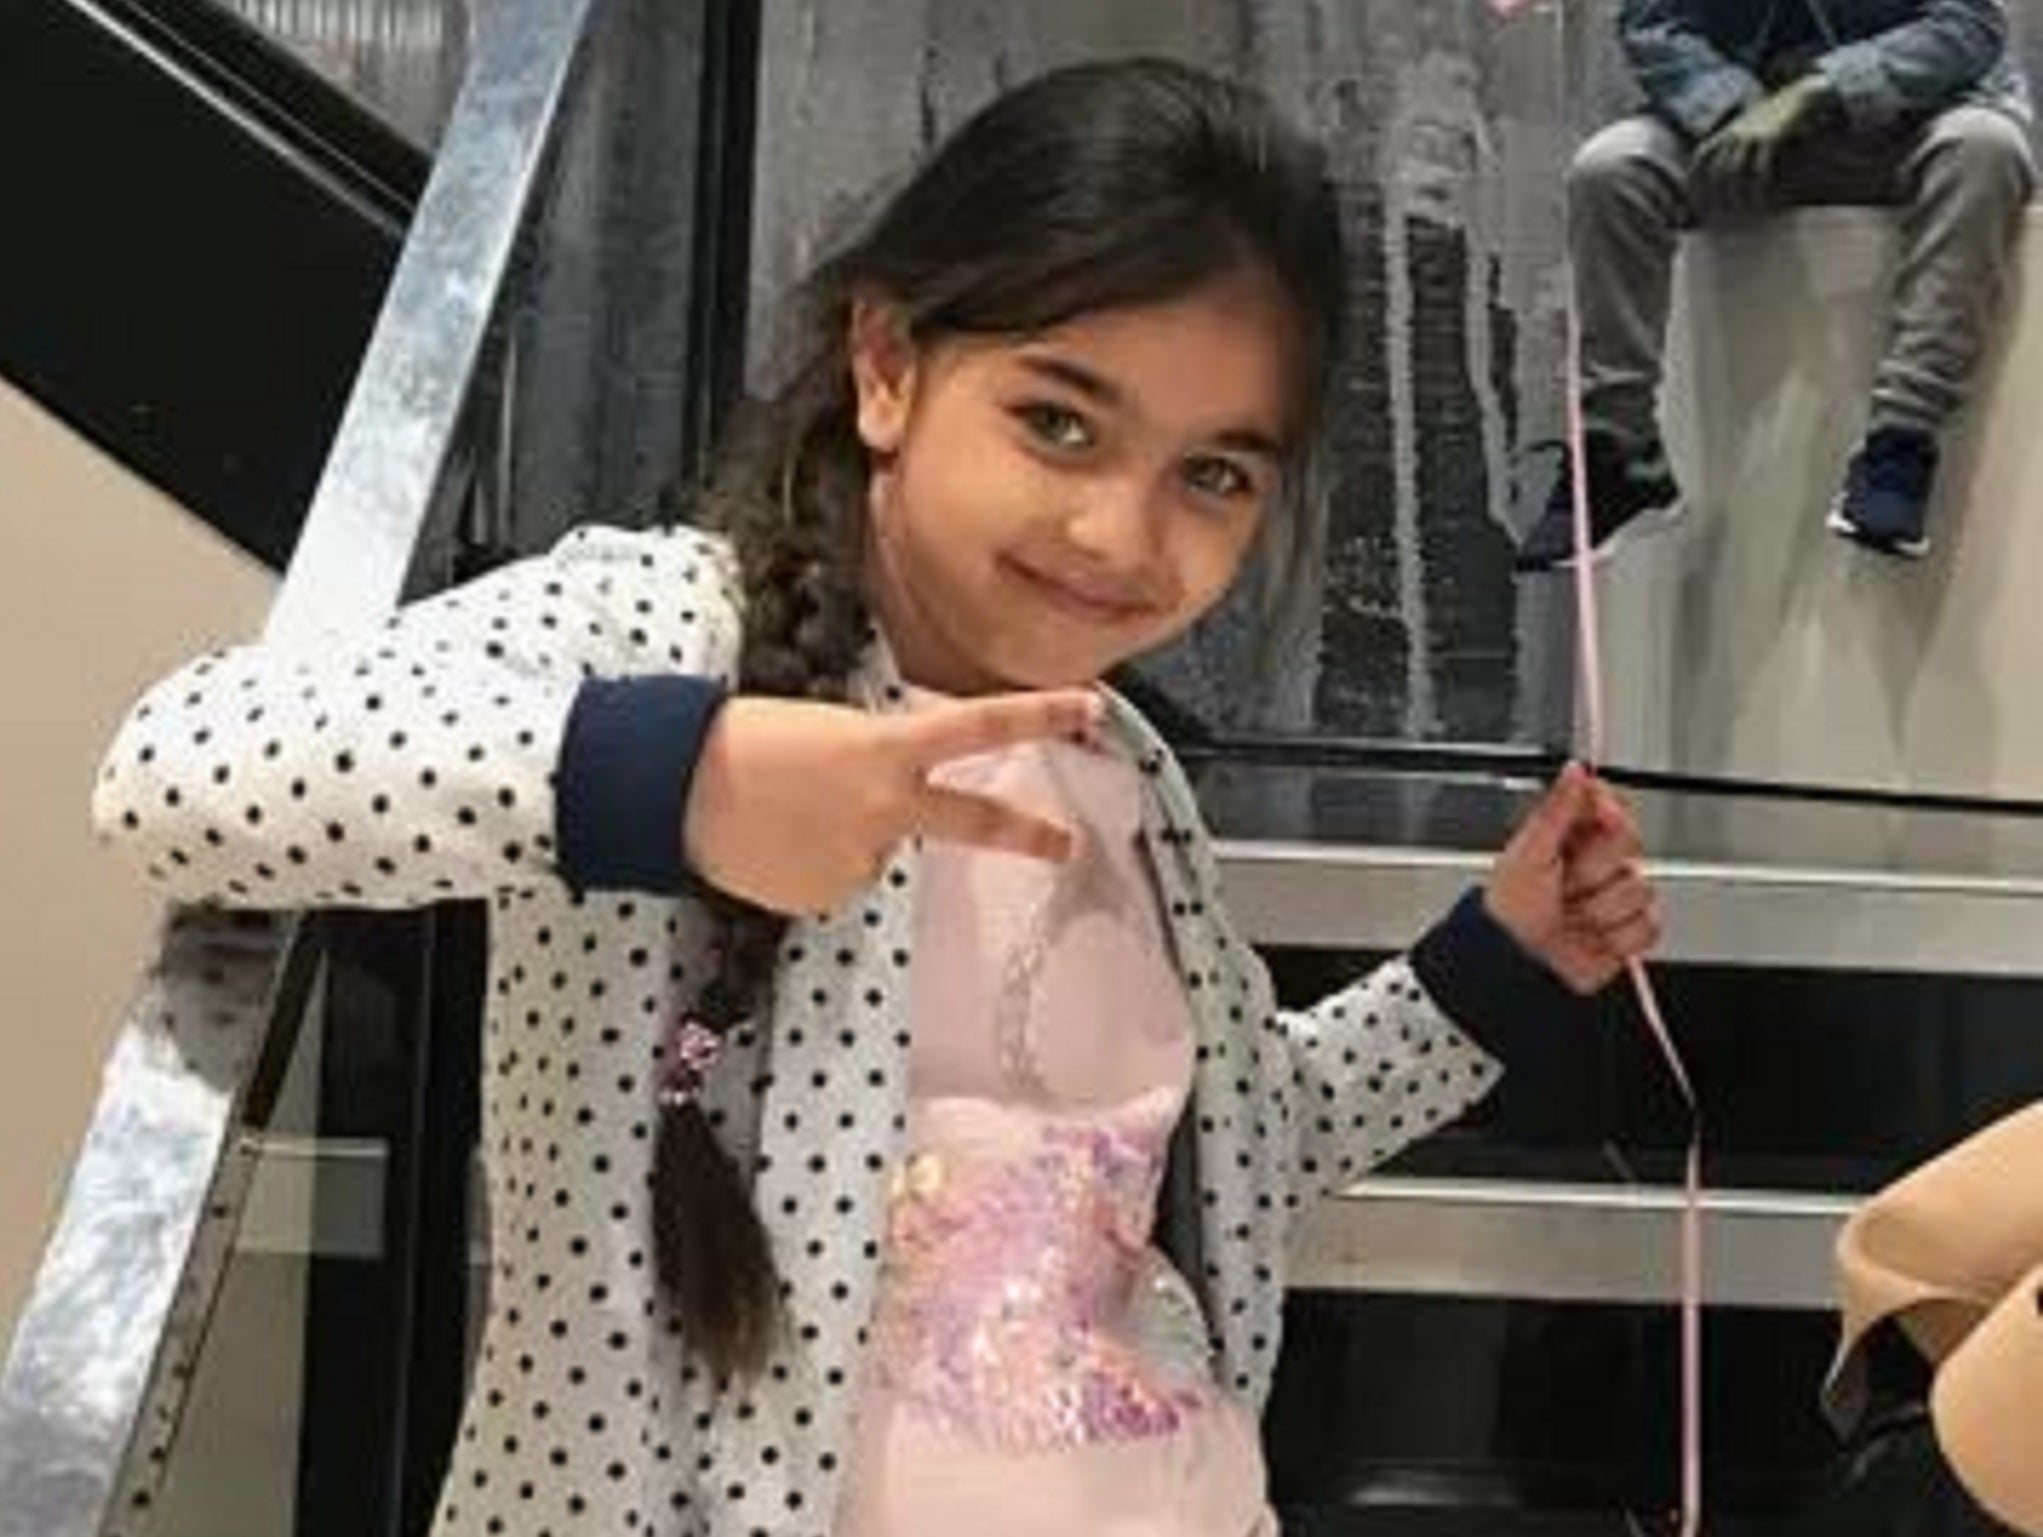 Six-year-old Beatrice is of Romanian origin and is local to Leyton